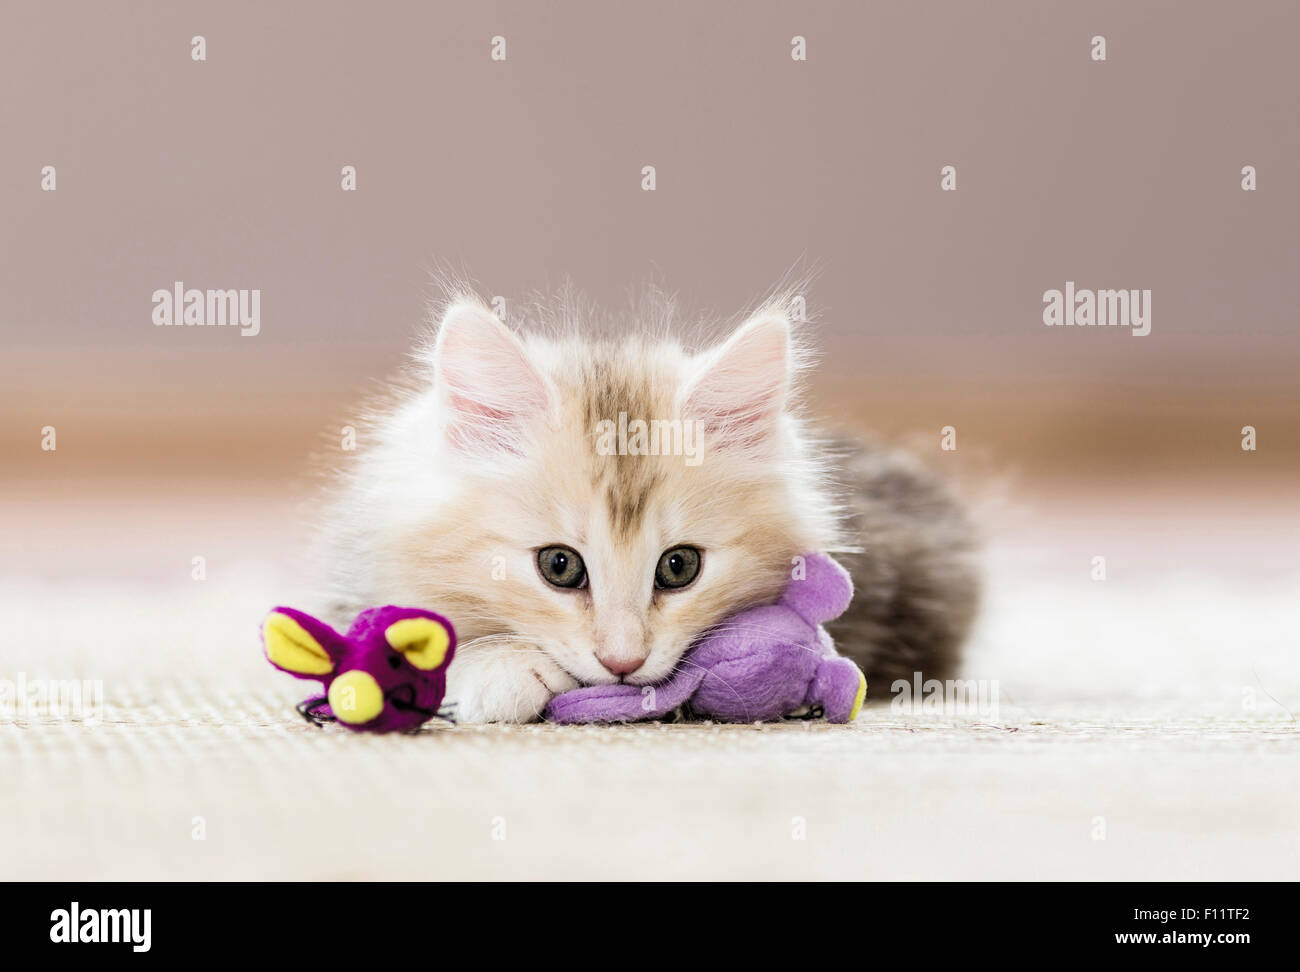 Norwegian Forest Cat Kitten playing toy mice, Stock Photo